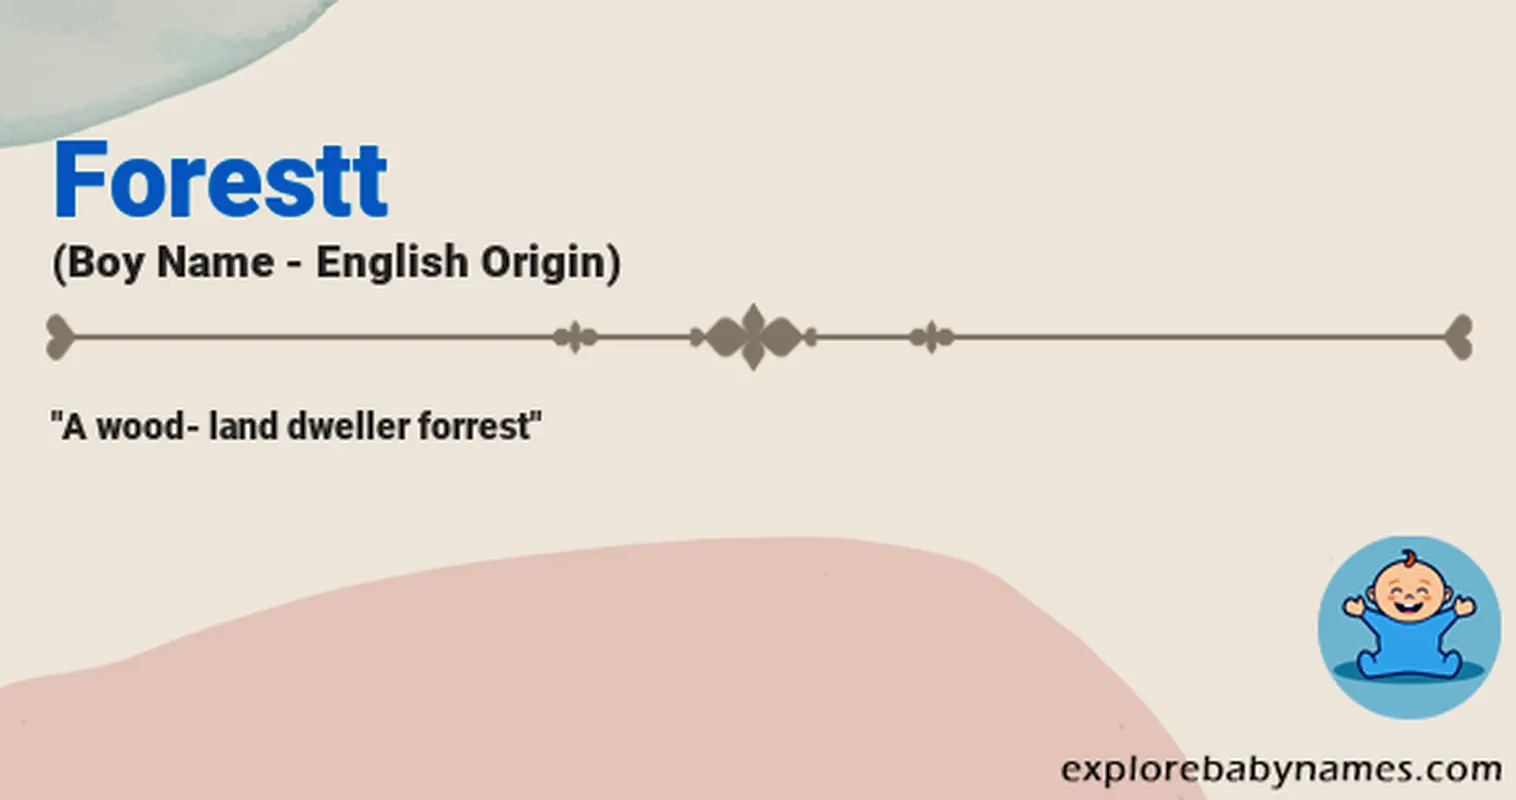 Meaning of Forestt